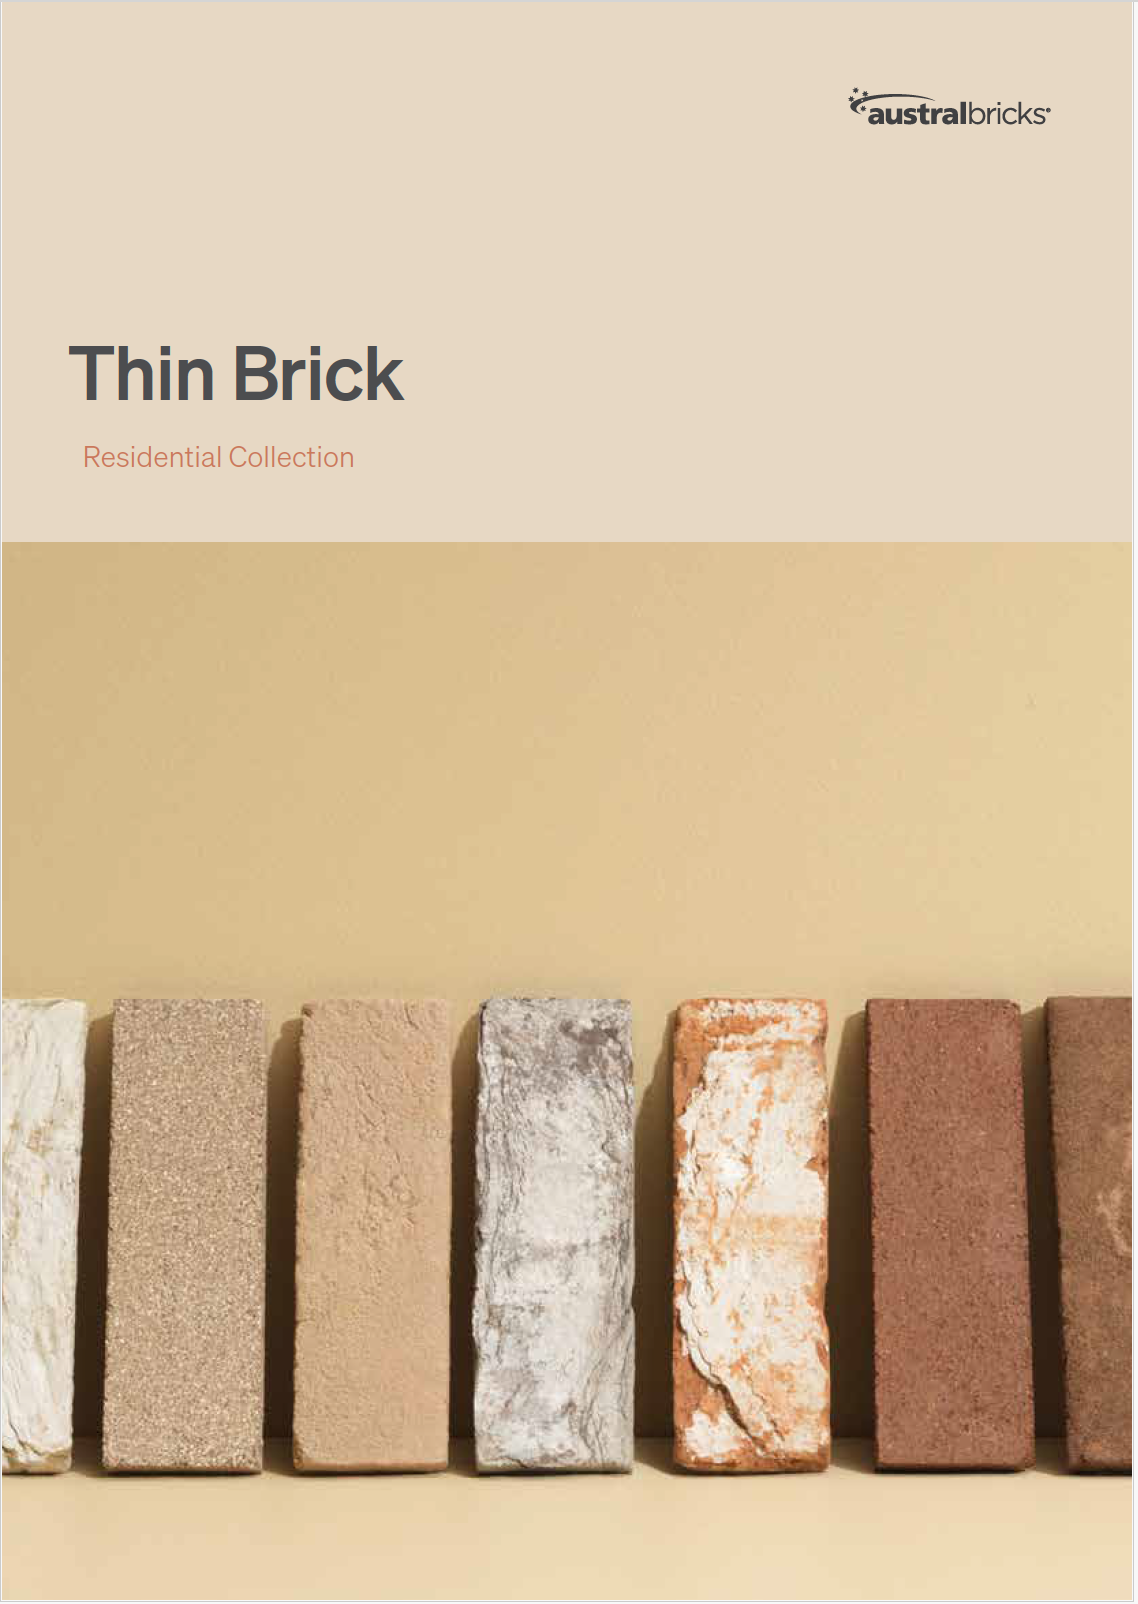 Austral Thin Brick Brochure cover with the heading Thin Brick and a row of recycled-looking clay bricks under the heading